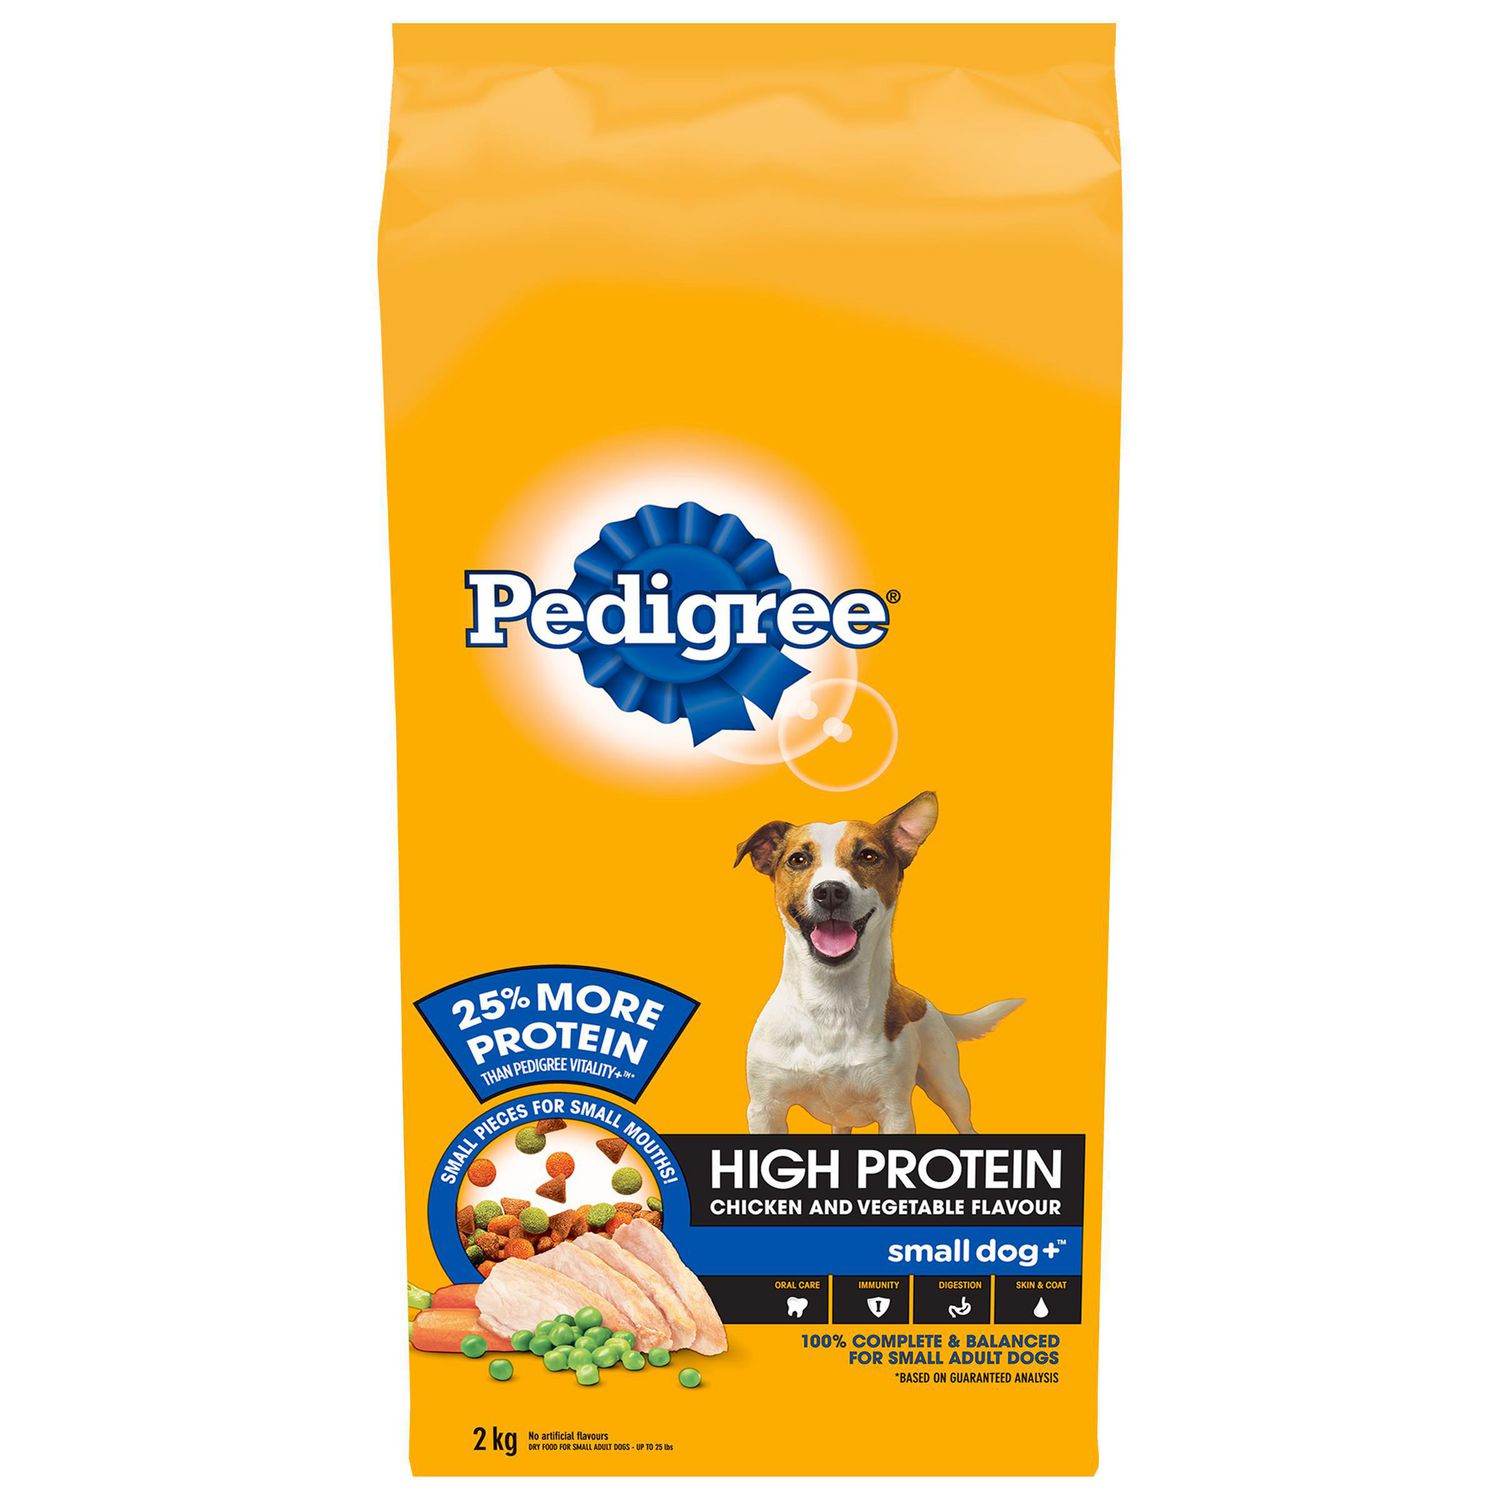 Pedigree Small Dog+ Chicken & Vegetable High Protein Dry Dog Food